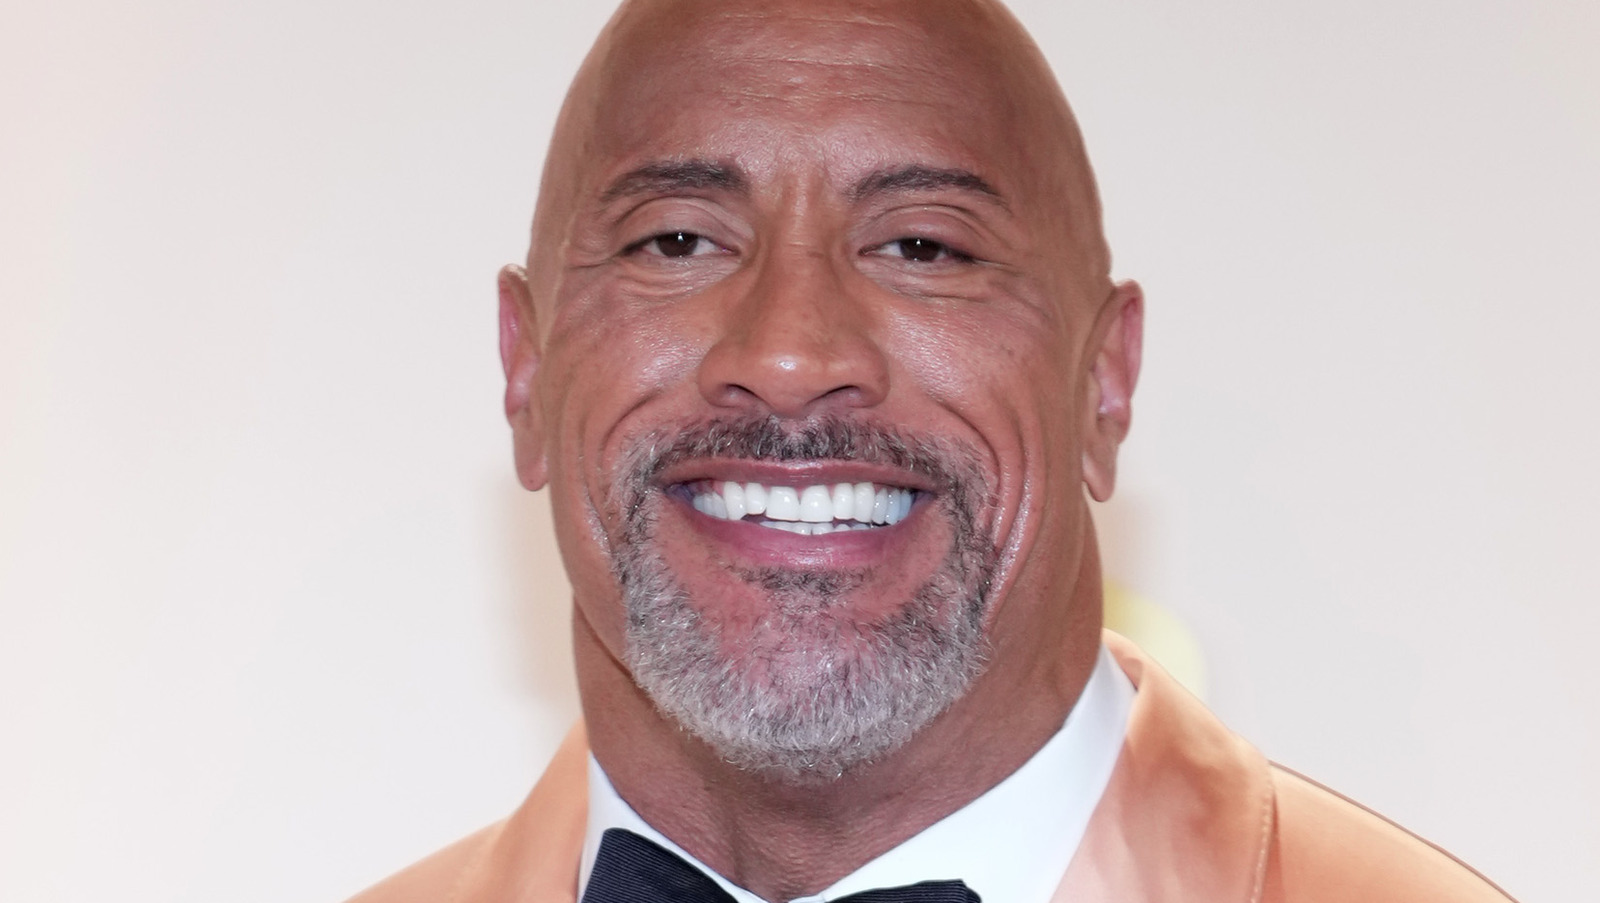 Dwayne Johnson Reportedly Returning to Disney After Black Adam Disaster as Moana  Live-Action Set to Begin Filming This Year - FandomWire